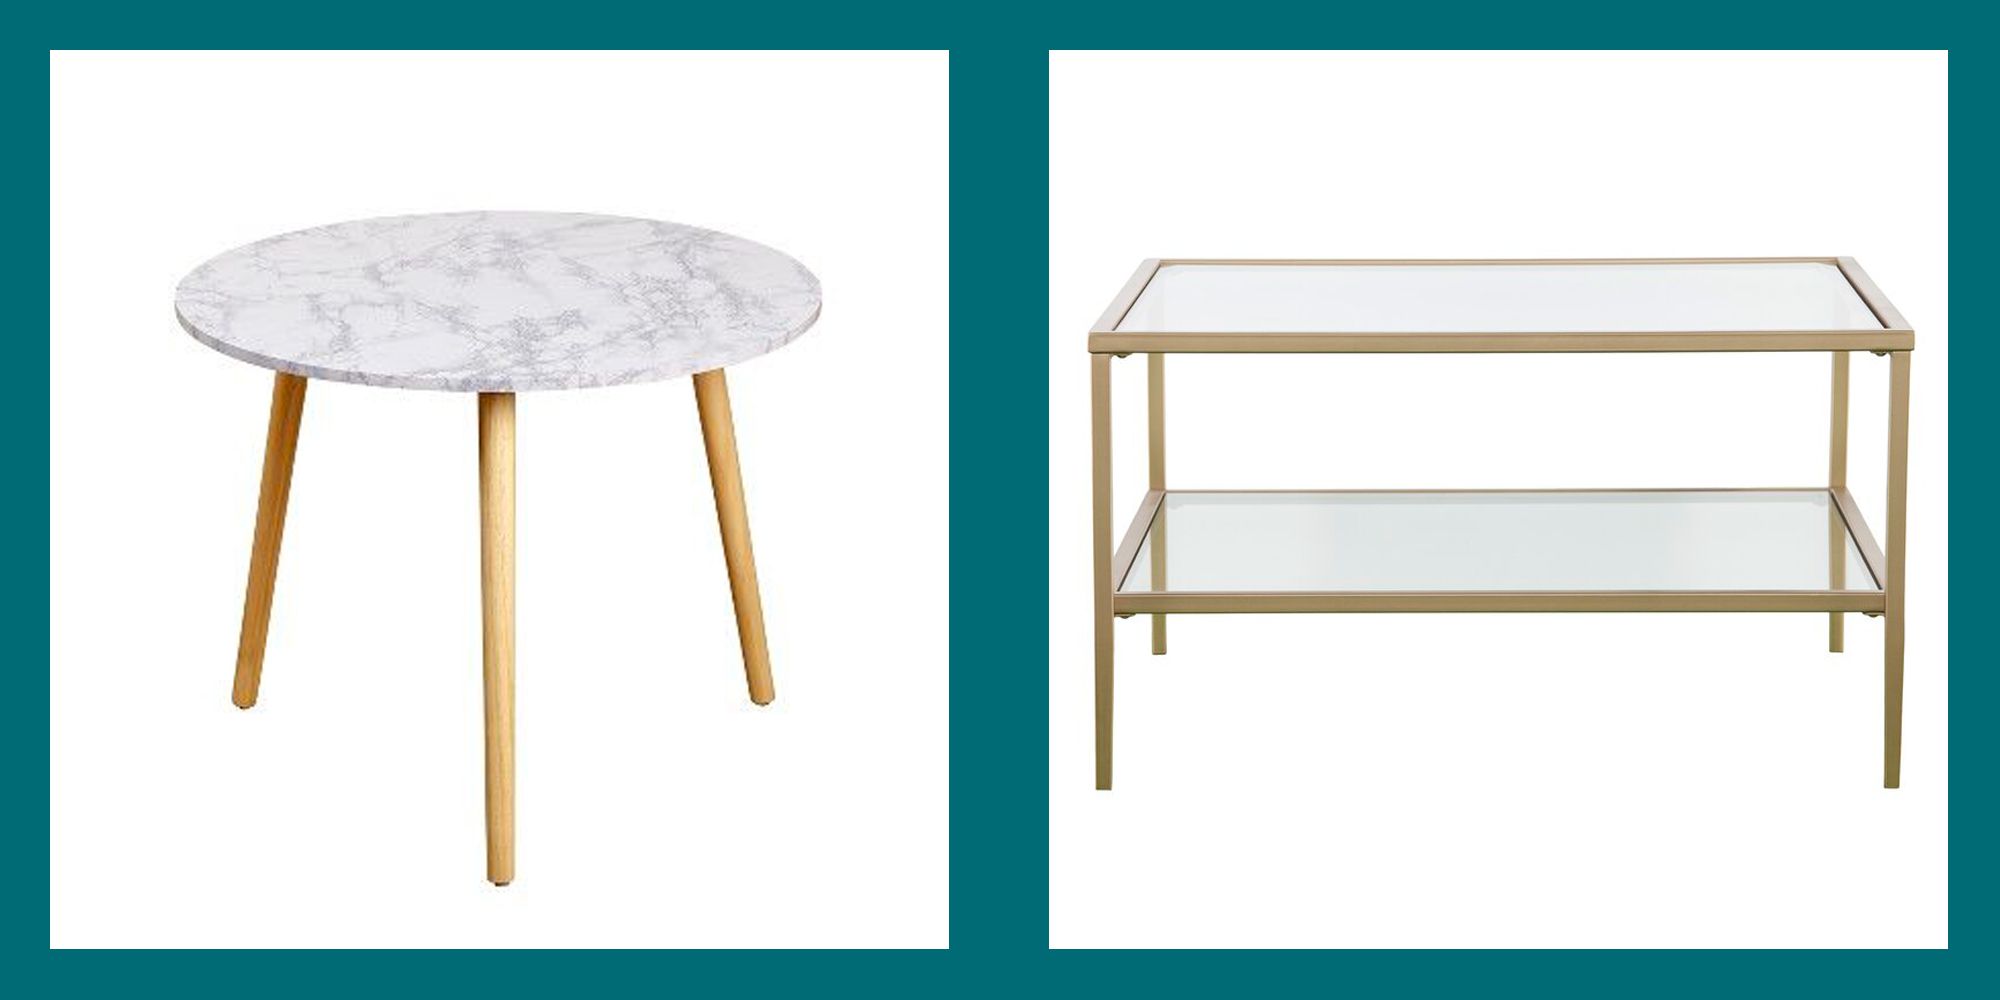 20 Best Small Coffee Tables - Furniture For Small Spaces